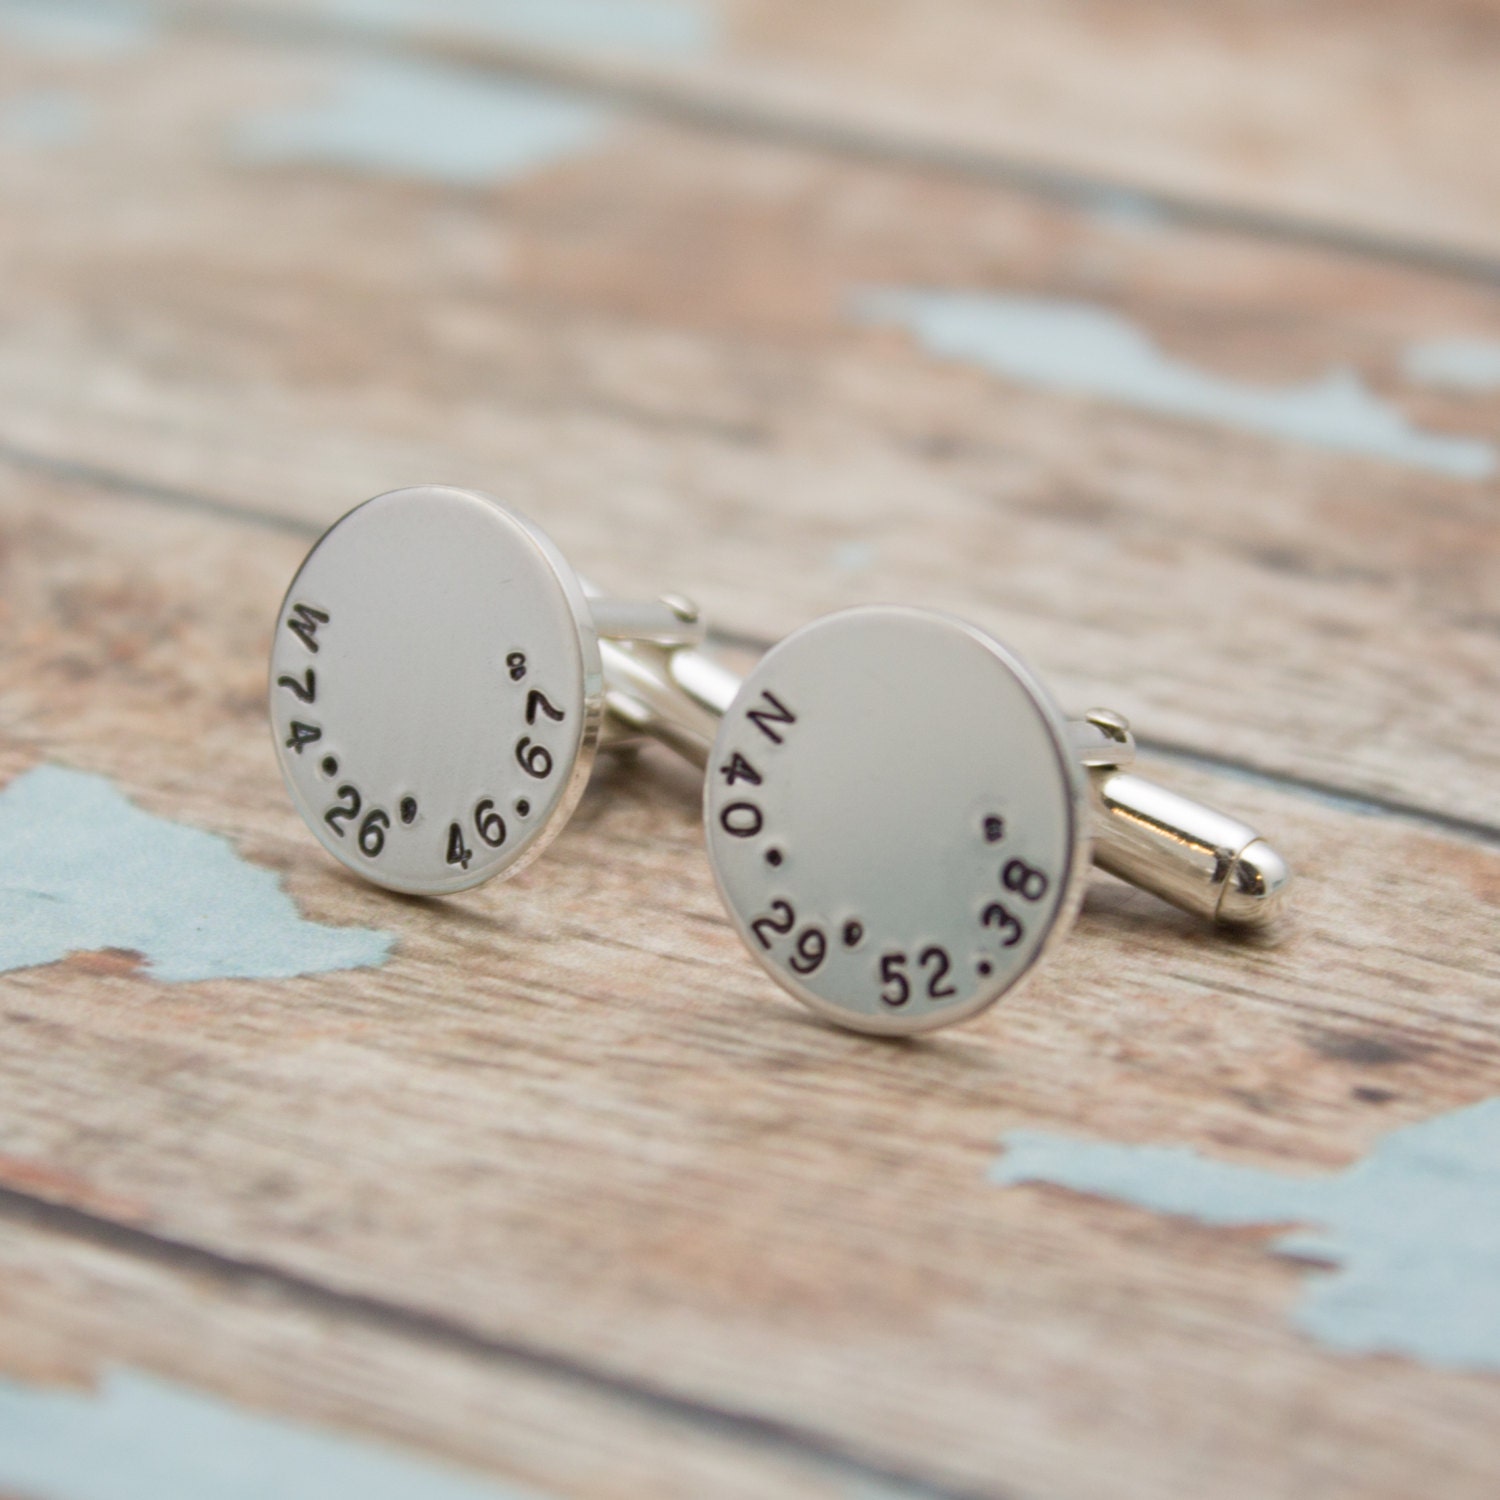 Latitude and Longitude Cuff Links, Coordinate Cufflinks, Personalized Cuff Links, Father's Day Gift